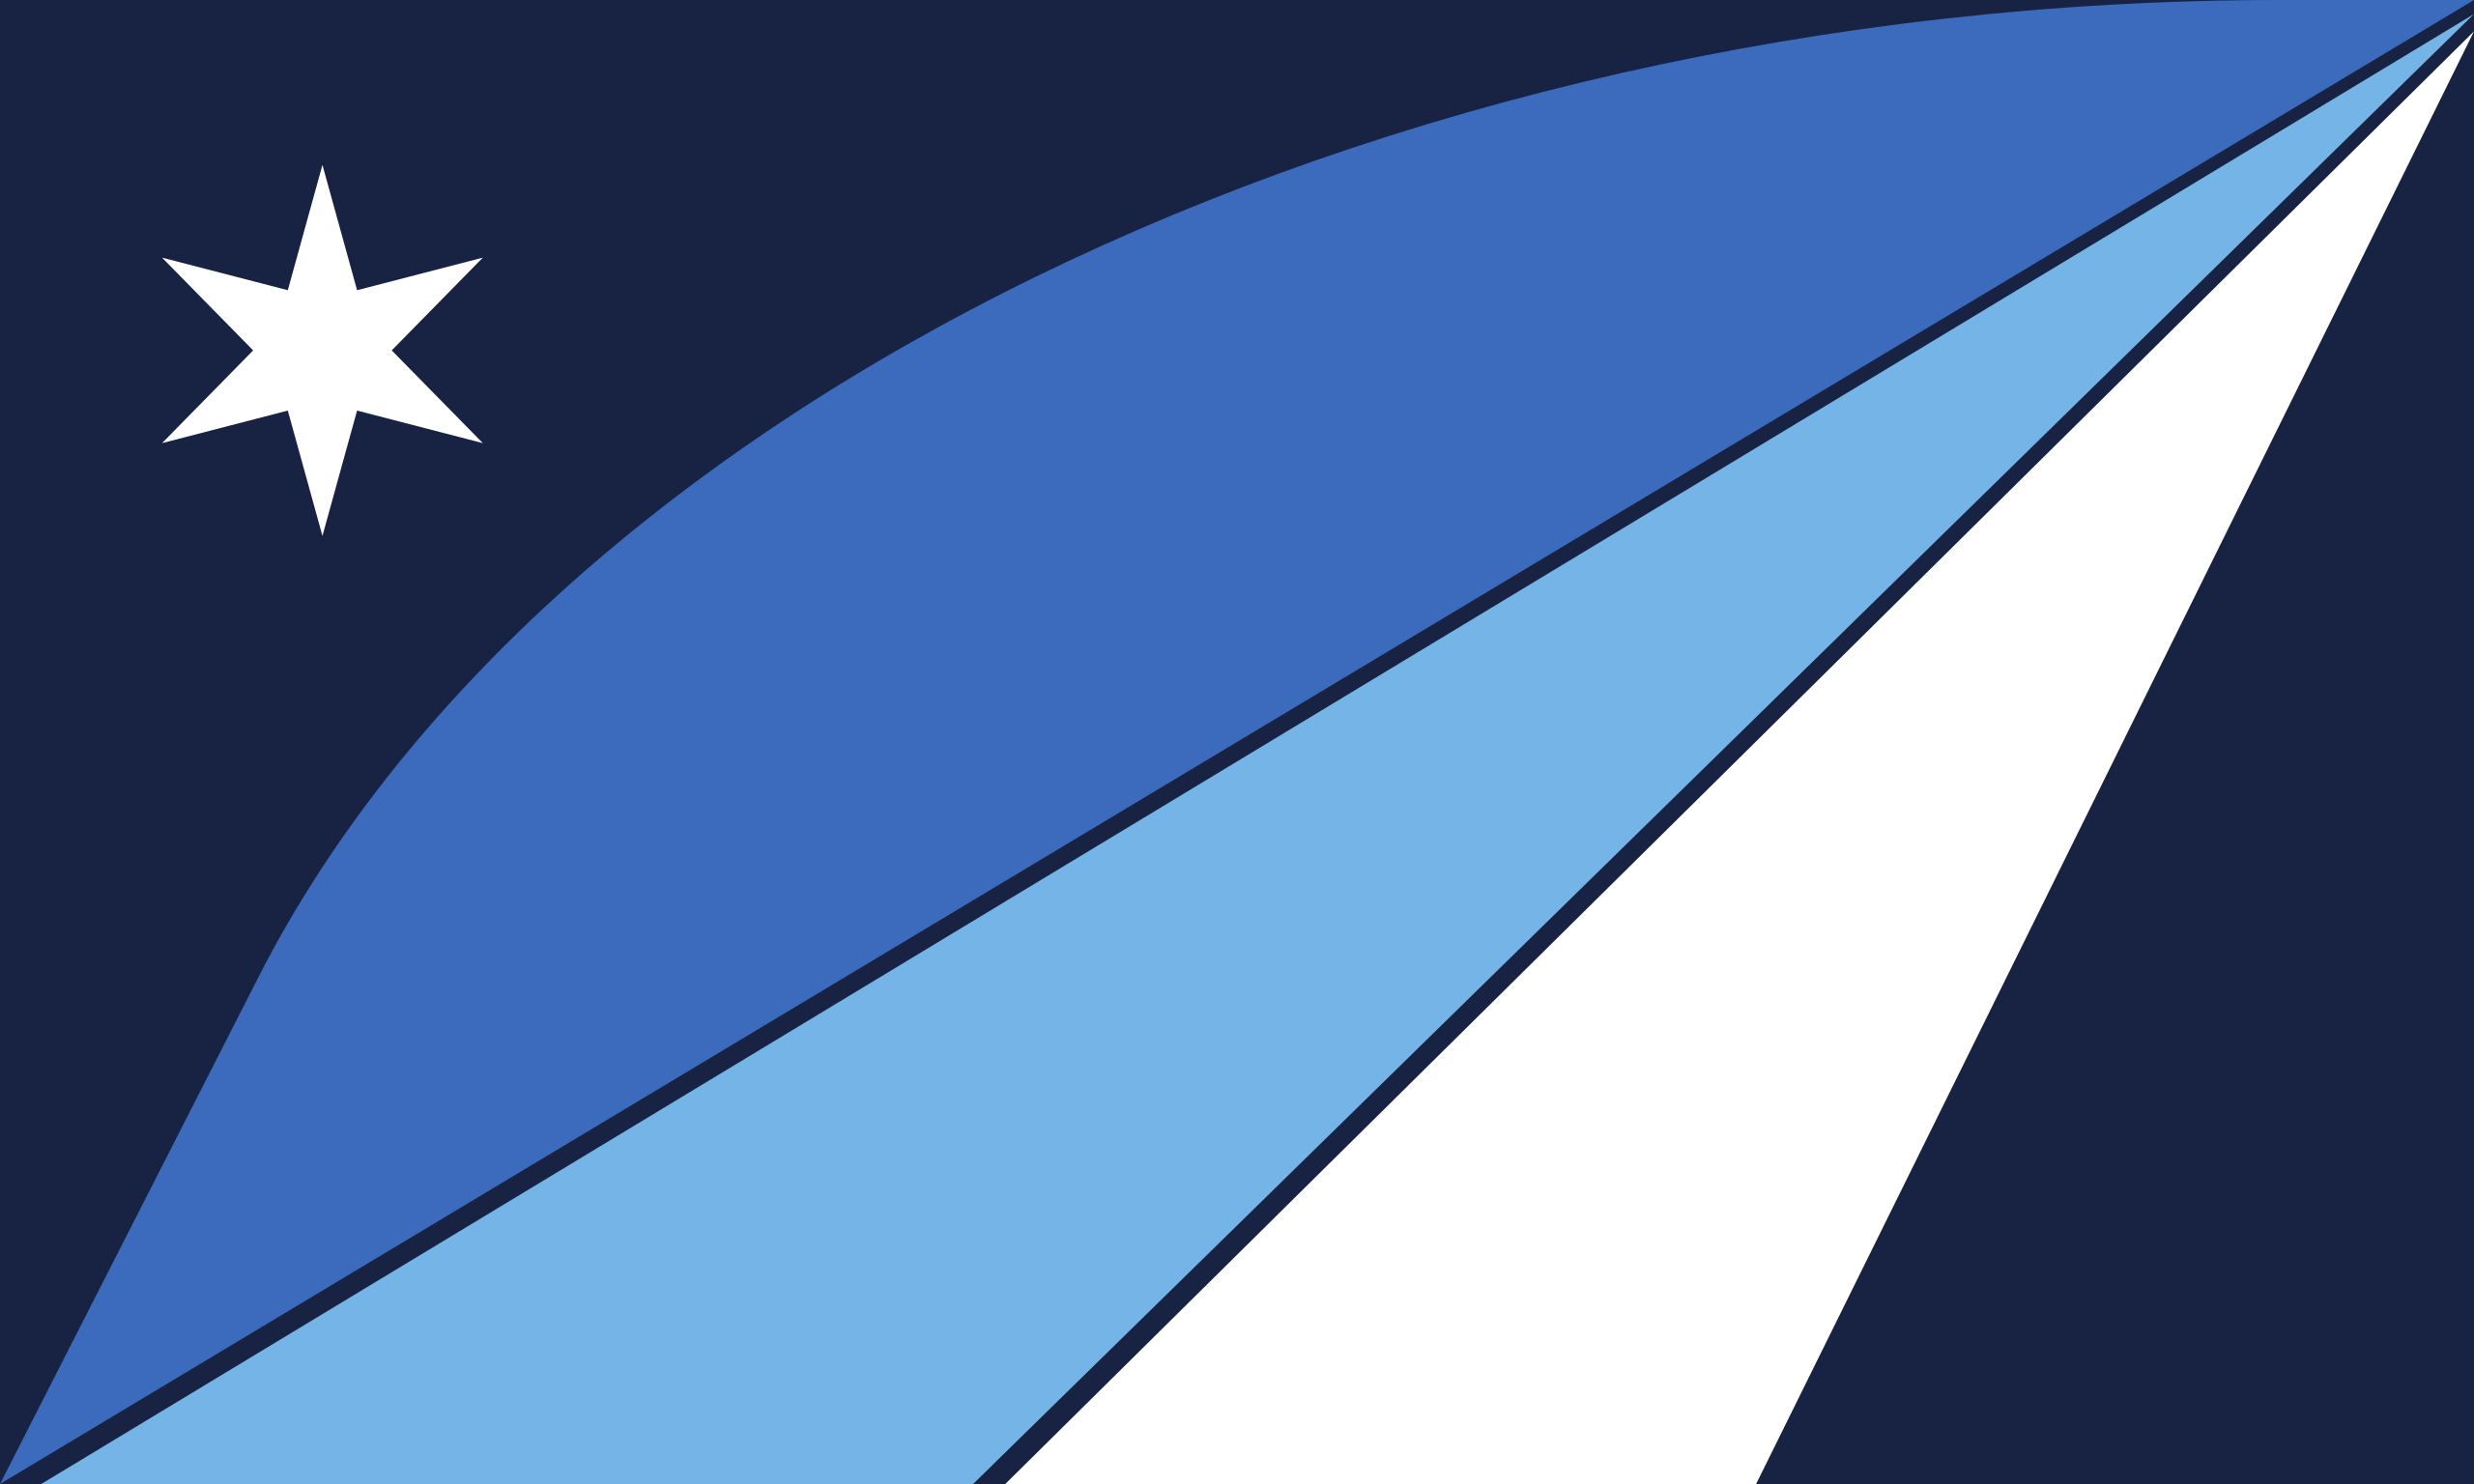 Columbia adopted a new city flag in 2020. The star represents Columbia as a capital city, and the three sections of the wing represent the three rivers. When Columbia was founded in 1786, Sen. John Lewis Gervais proclaimed that the city would be a place where residents would “find refuge under the wings of Columbia.” Ever since, wings have continued to be a recurring identifying symbol of the City of Columbia.